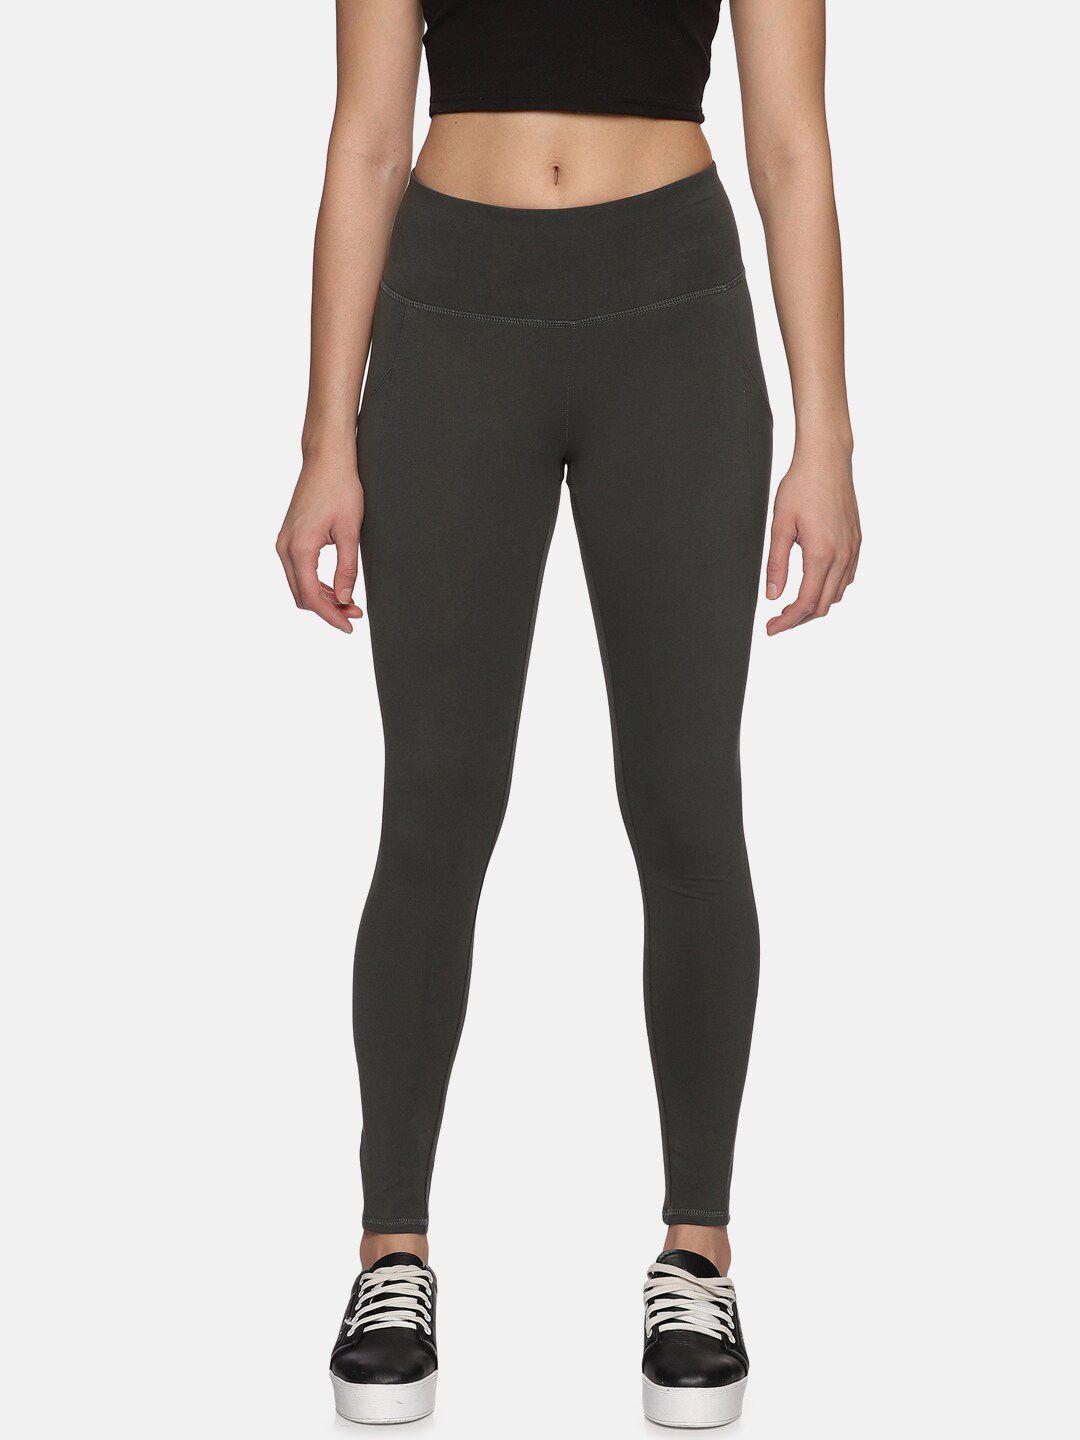 here&now skinny fit training or gym sports tights